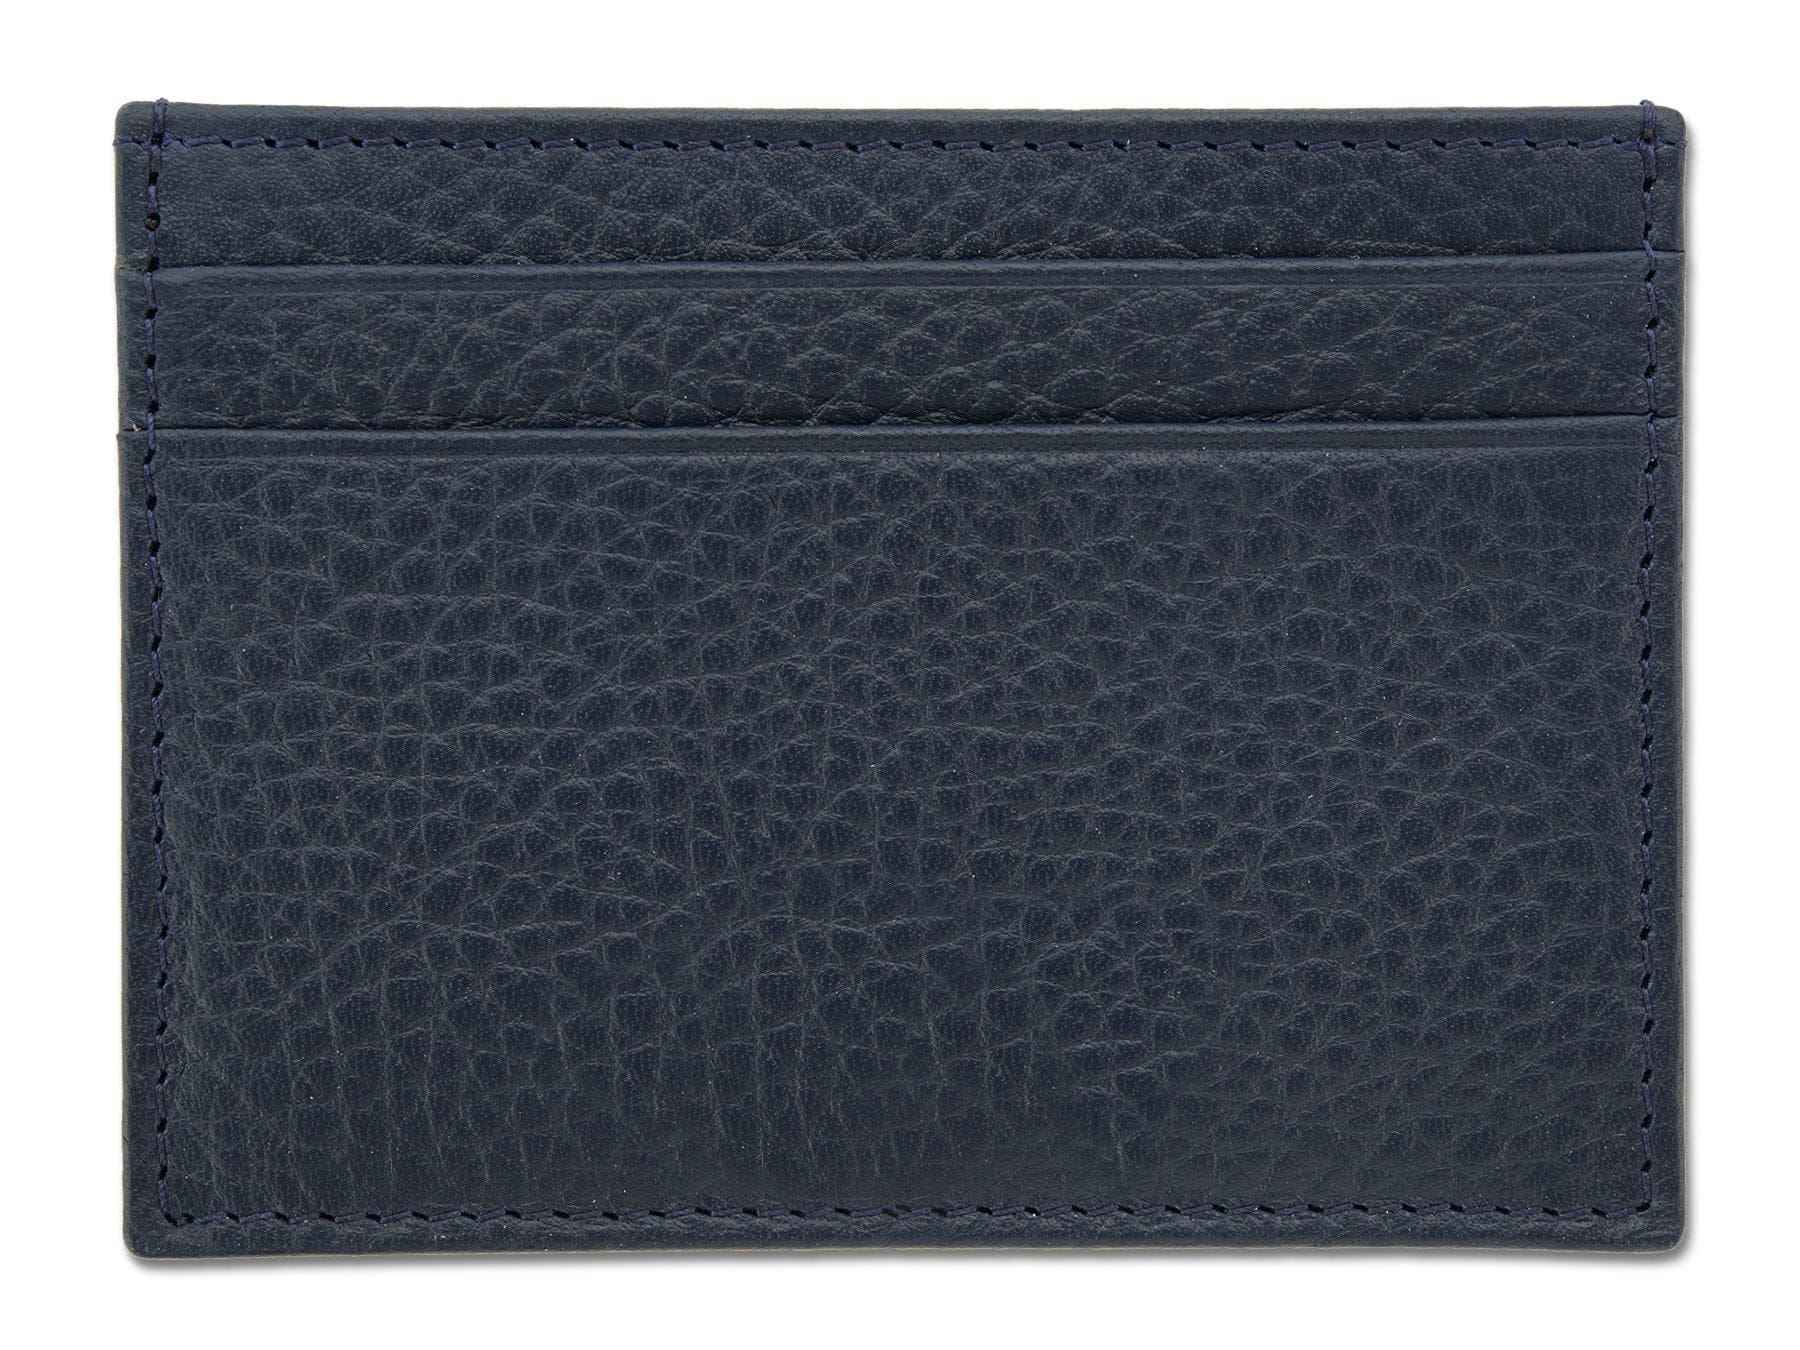 Navy Calf Leather Double Sided Card Holder